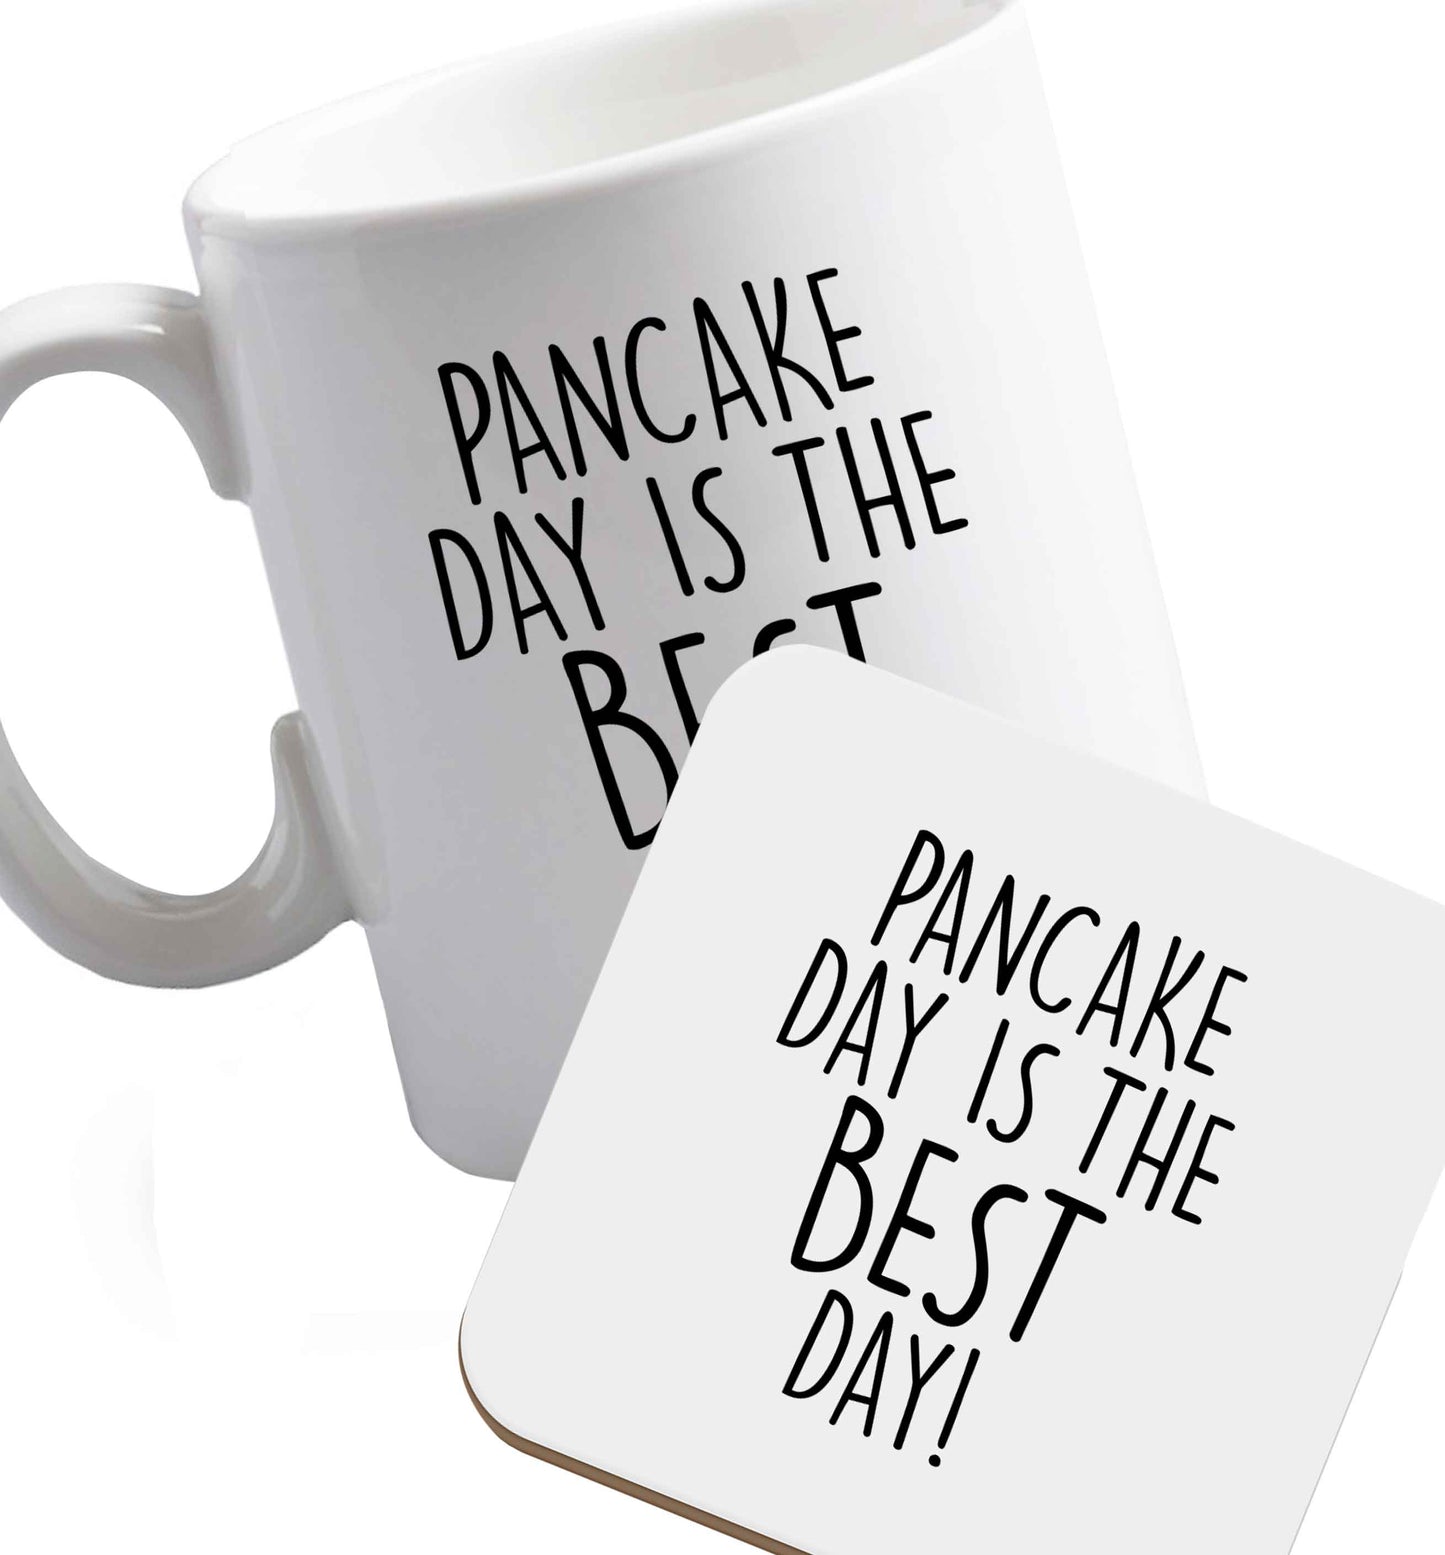 10 oz Pancake Day is the Best Day ceramic mug and coaster set right handed